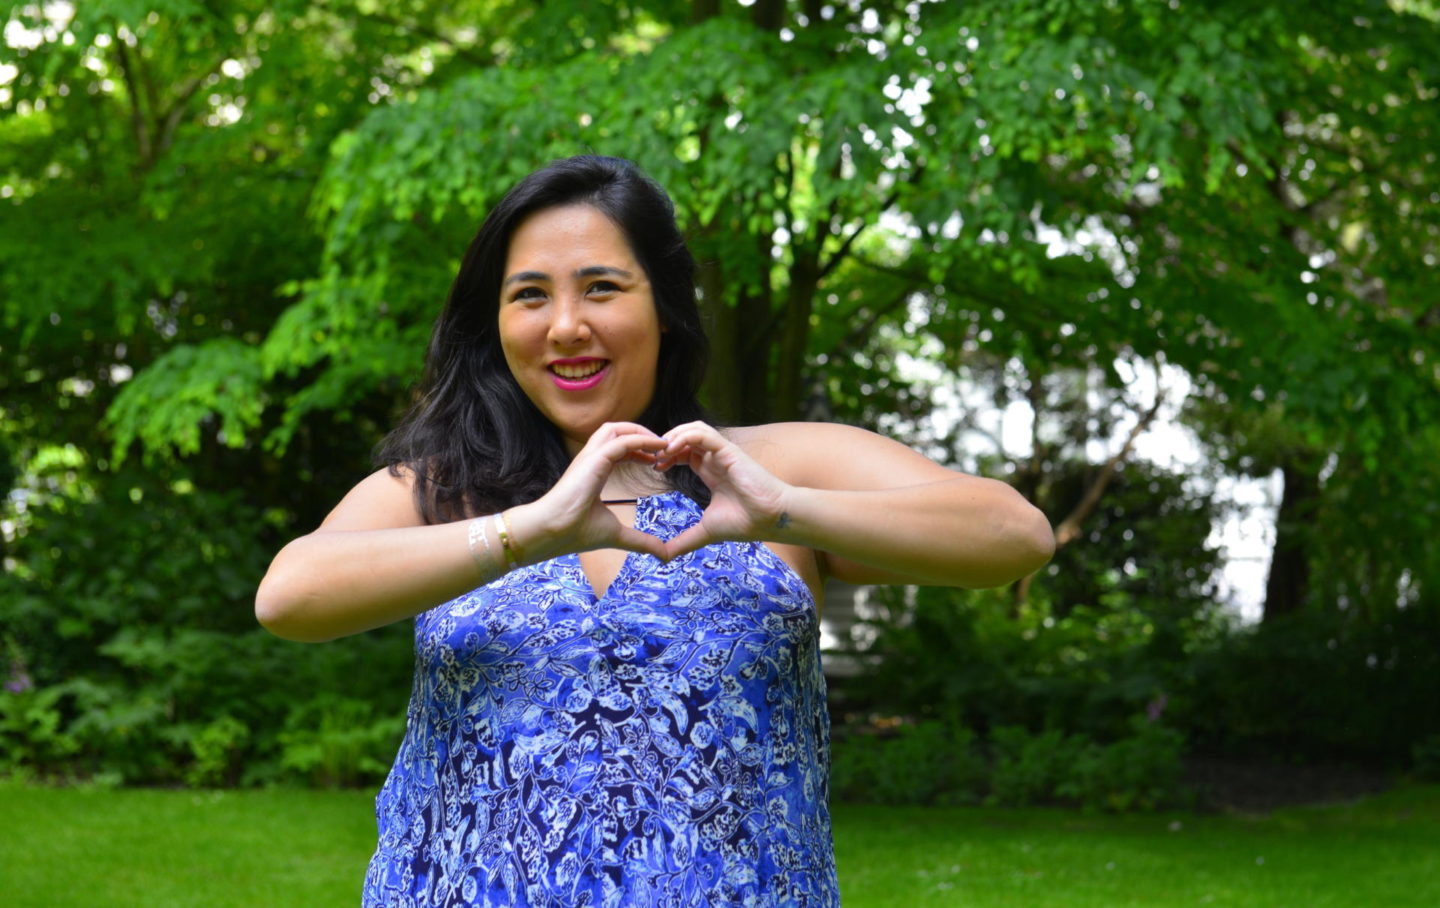 MICHELLE ELMAN ON HER SCARS, PCOS AND HOW SHE FOUND BODY POSITIVITY